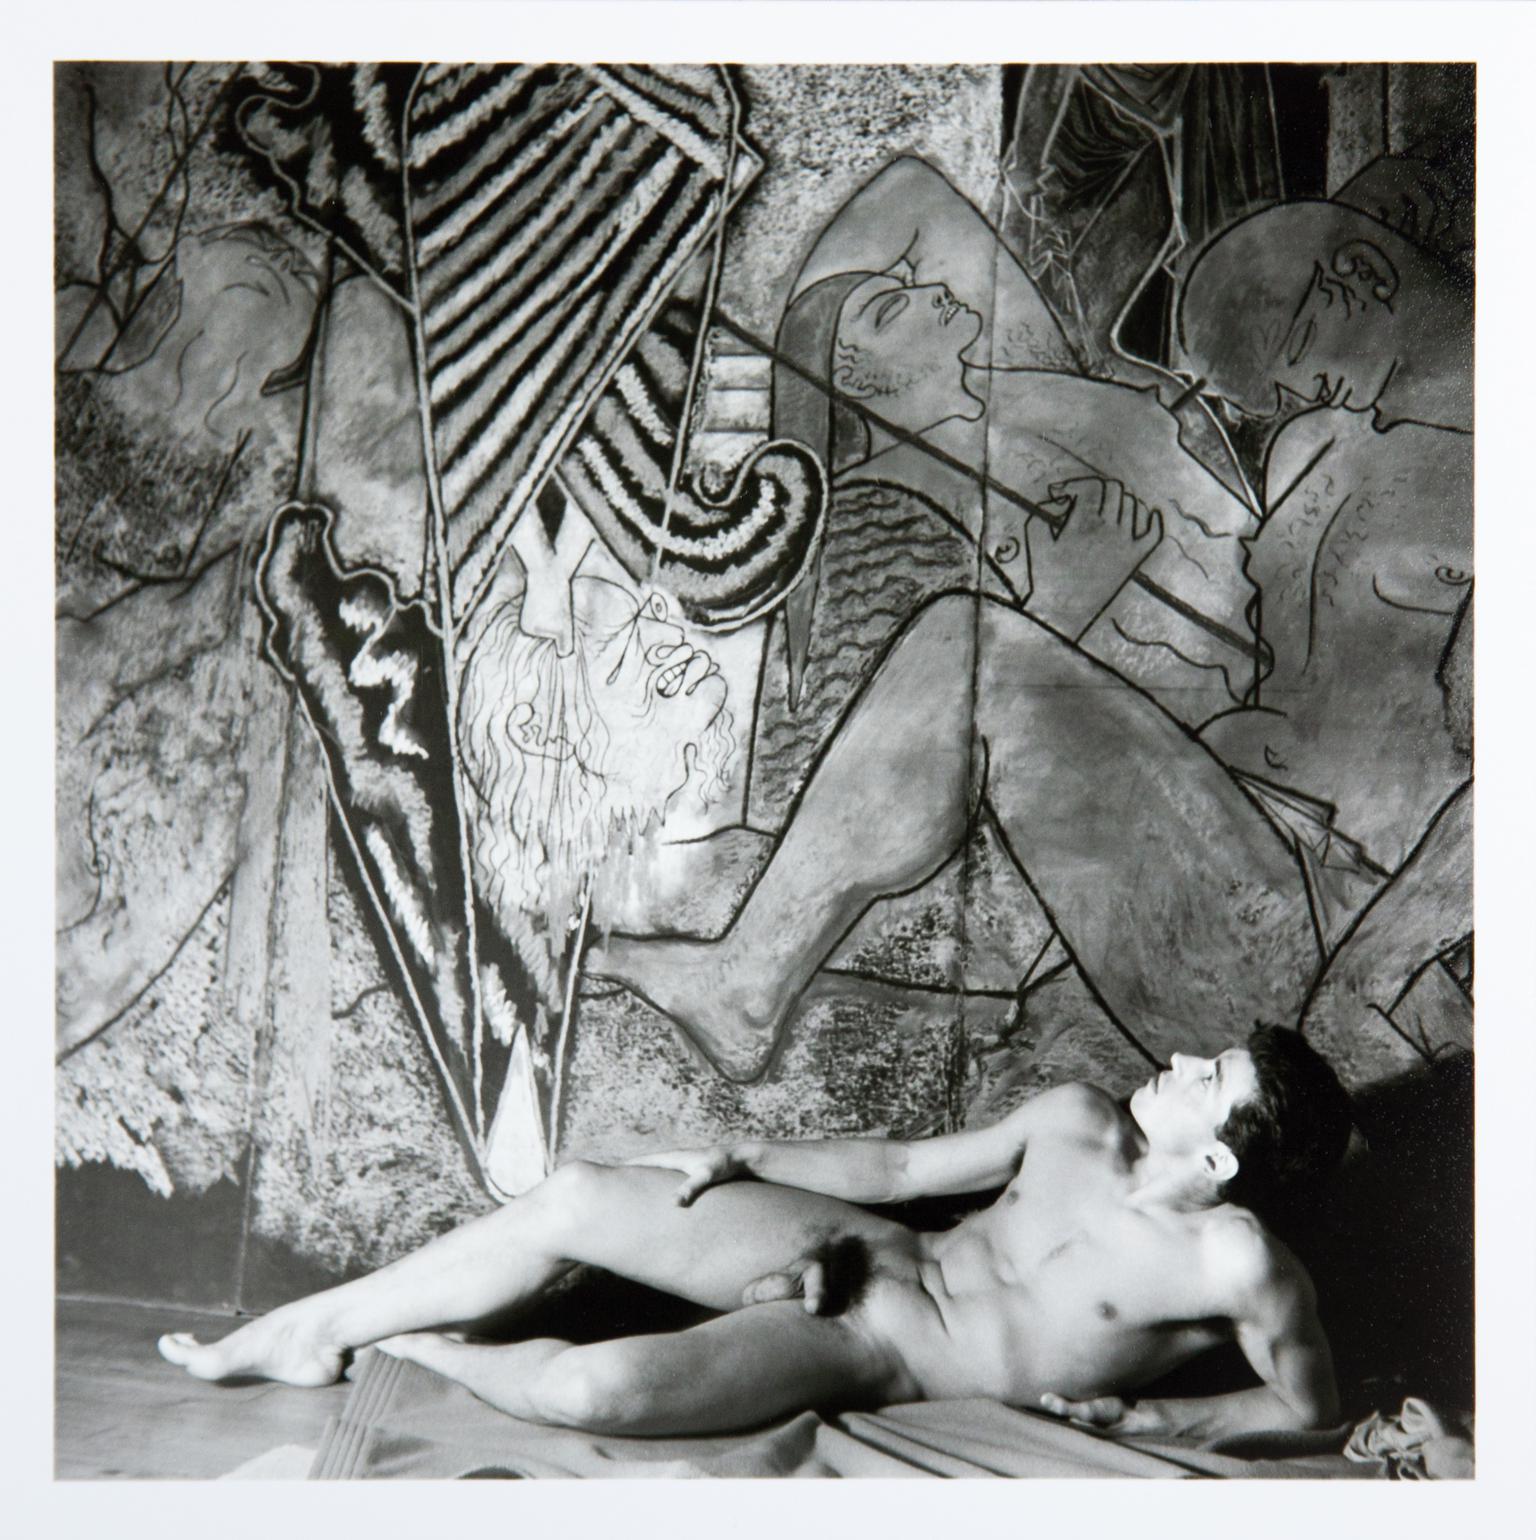 Edouard Dermit in front of Cocteau's pastel drawing "Judith et Holopherne"